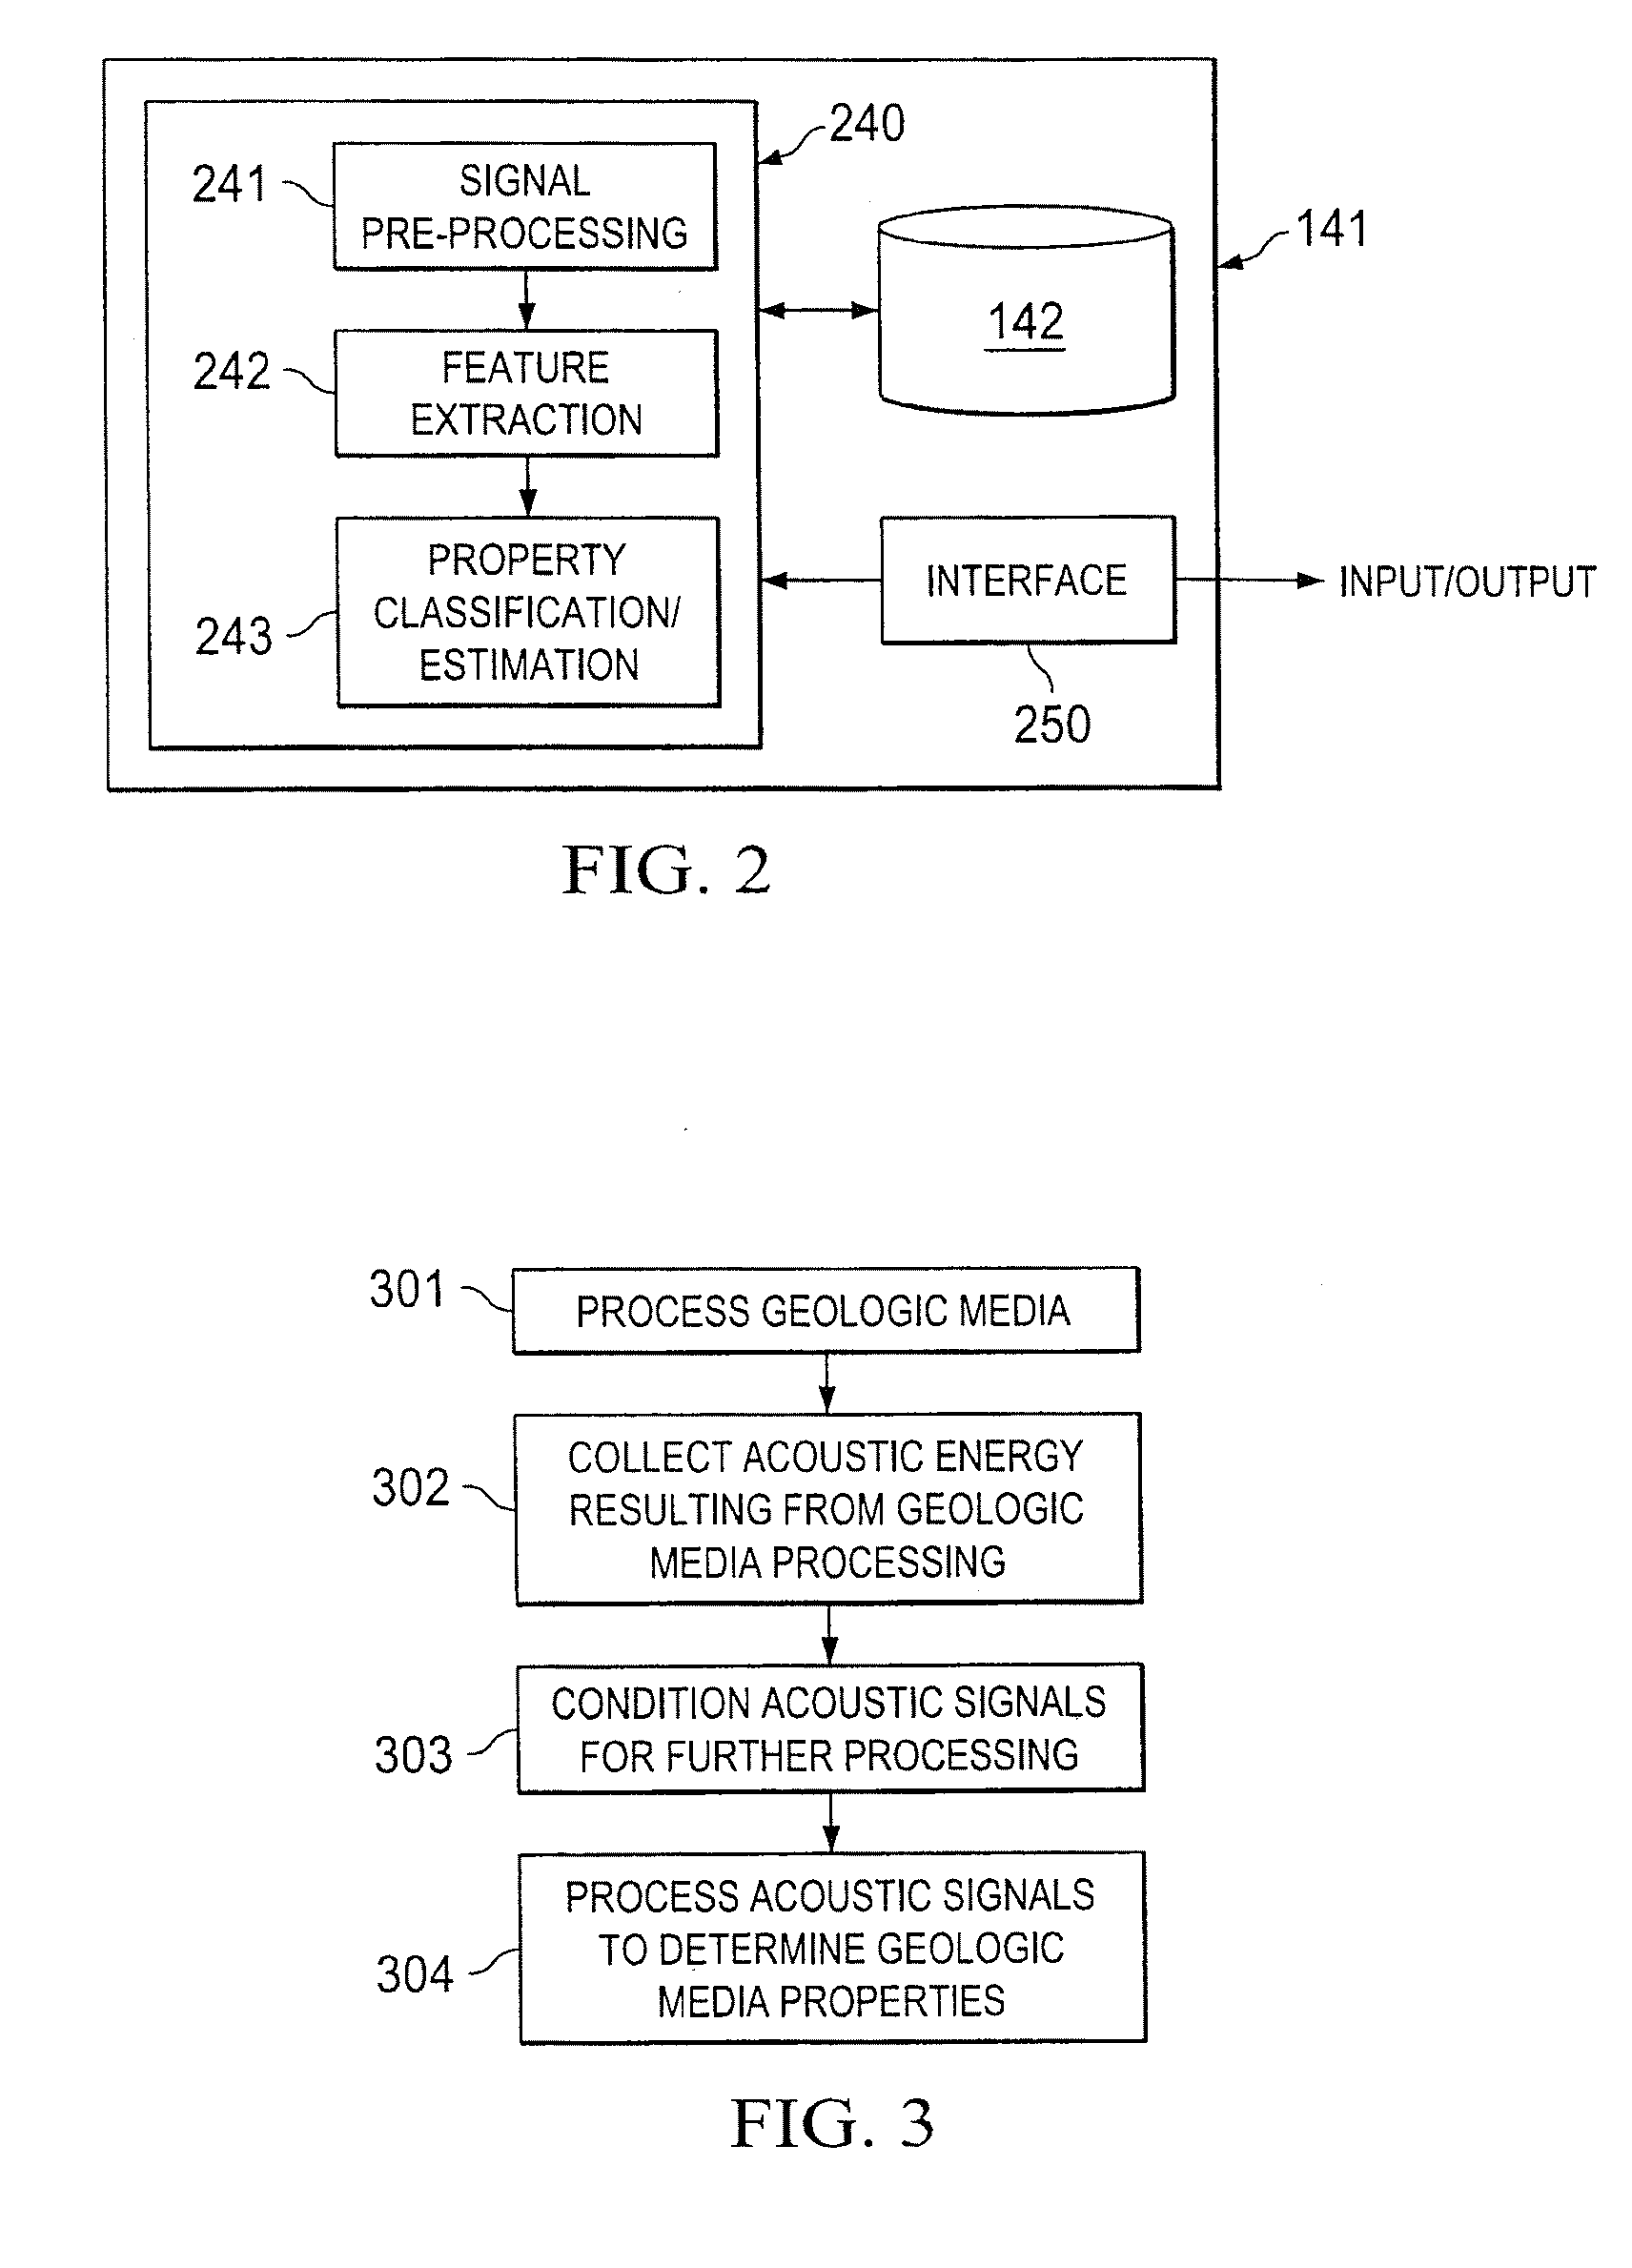 Systems and Methods For Determining Geologic Properties Using Acoustic Analysis